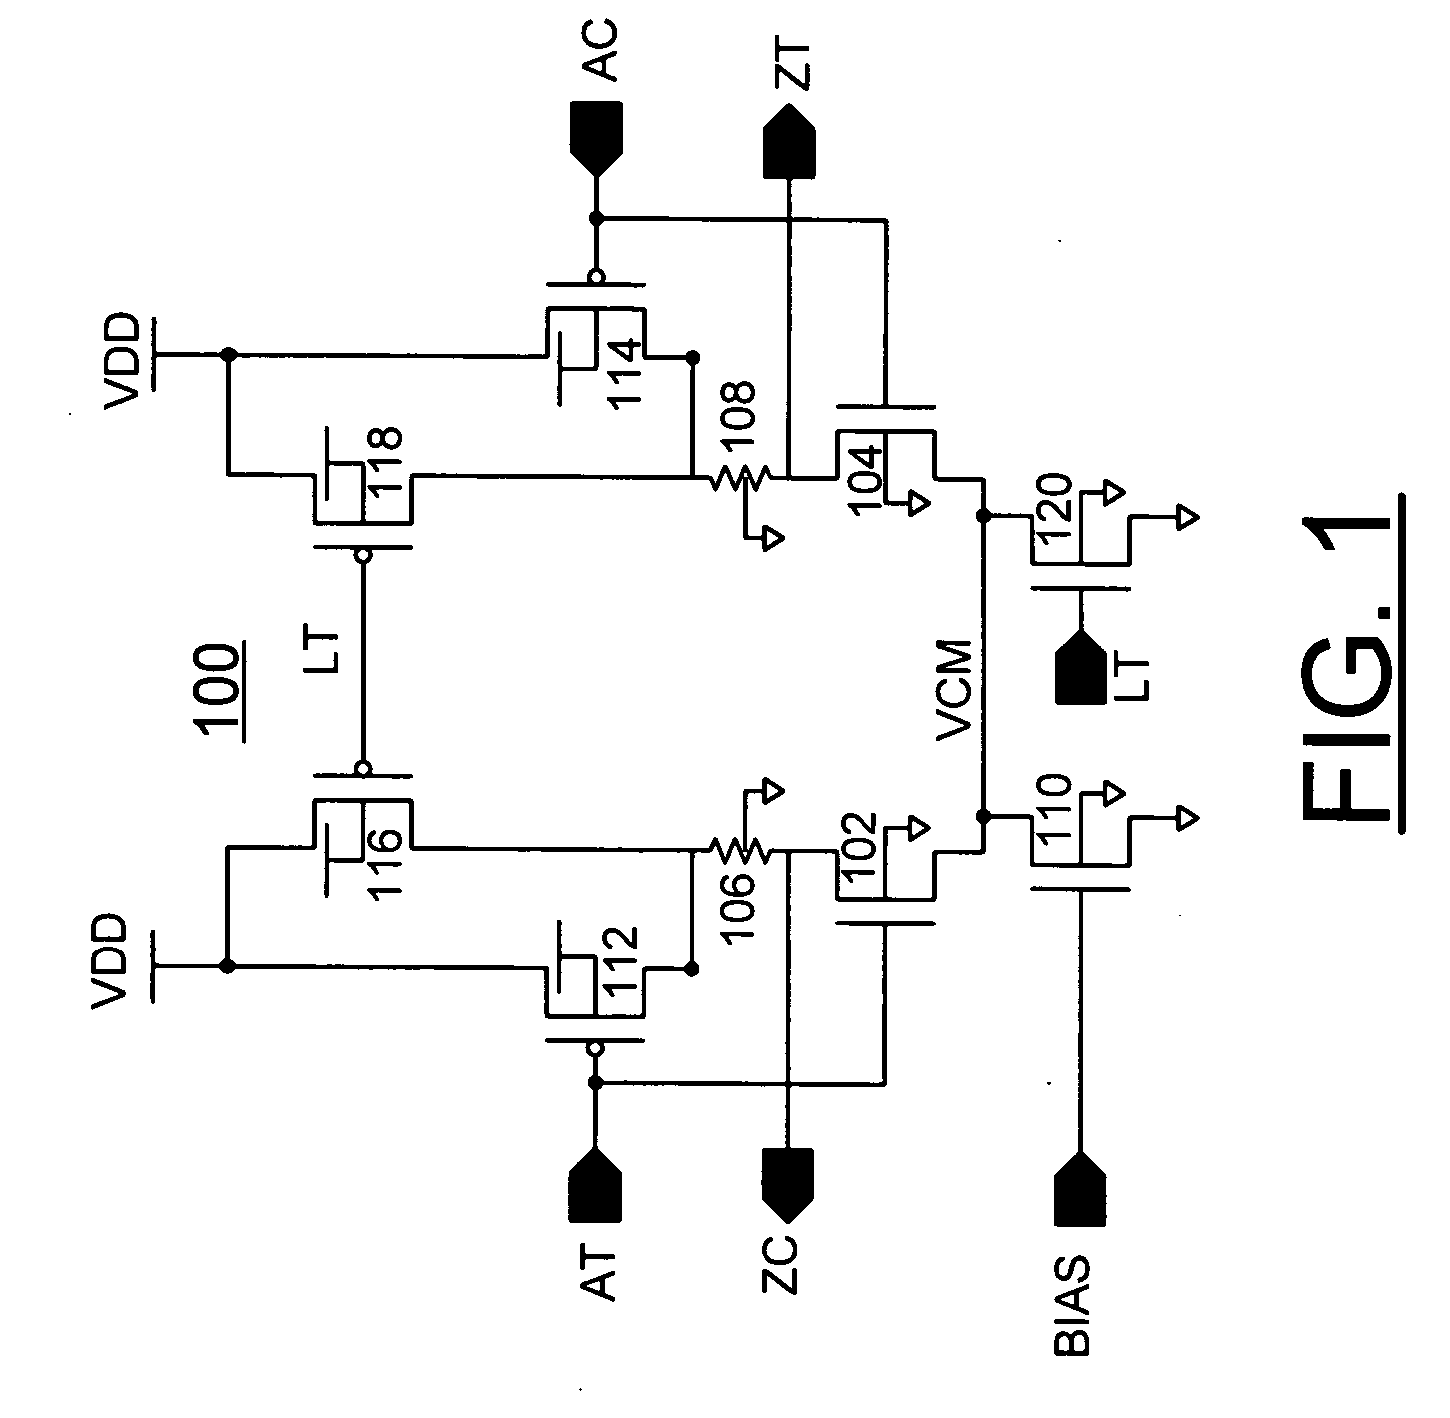 Dual mode analog differential and CMOS logic circuit